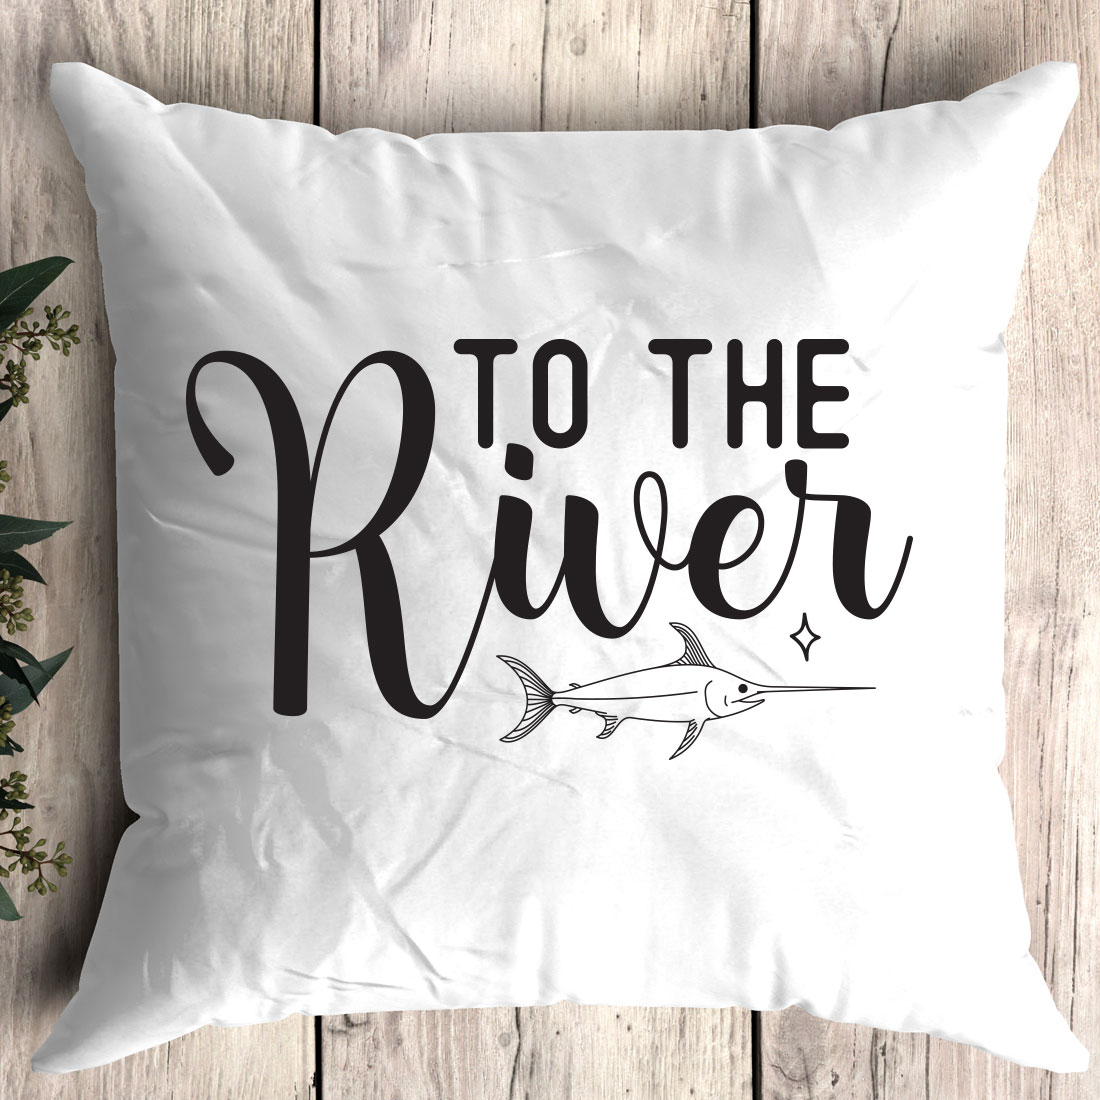 White pillow with the words to the river printed on it.